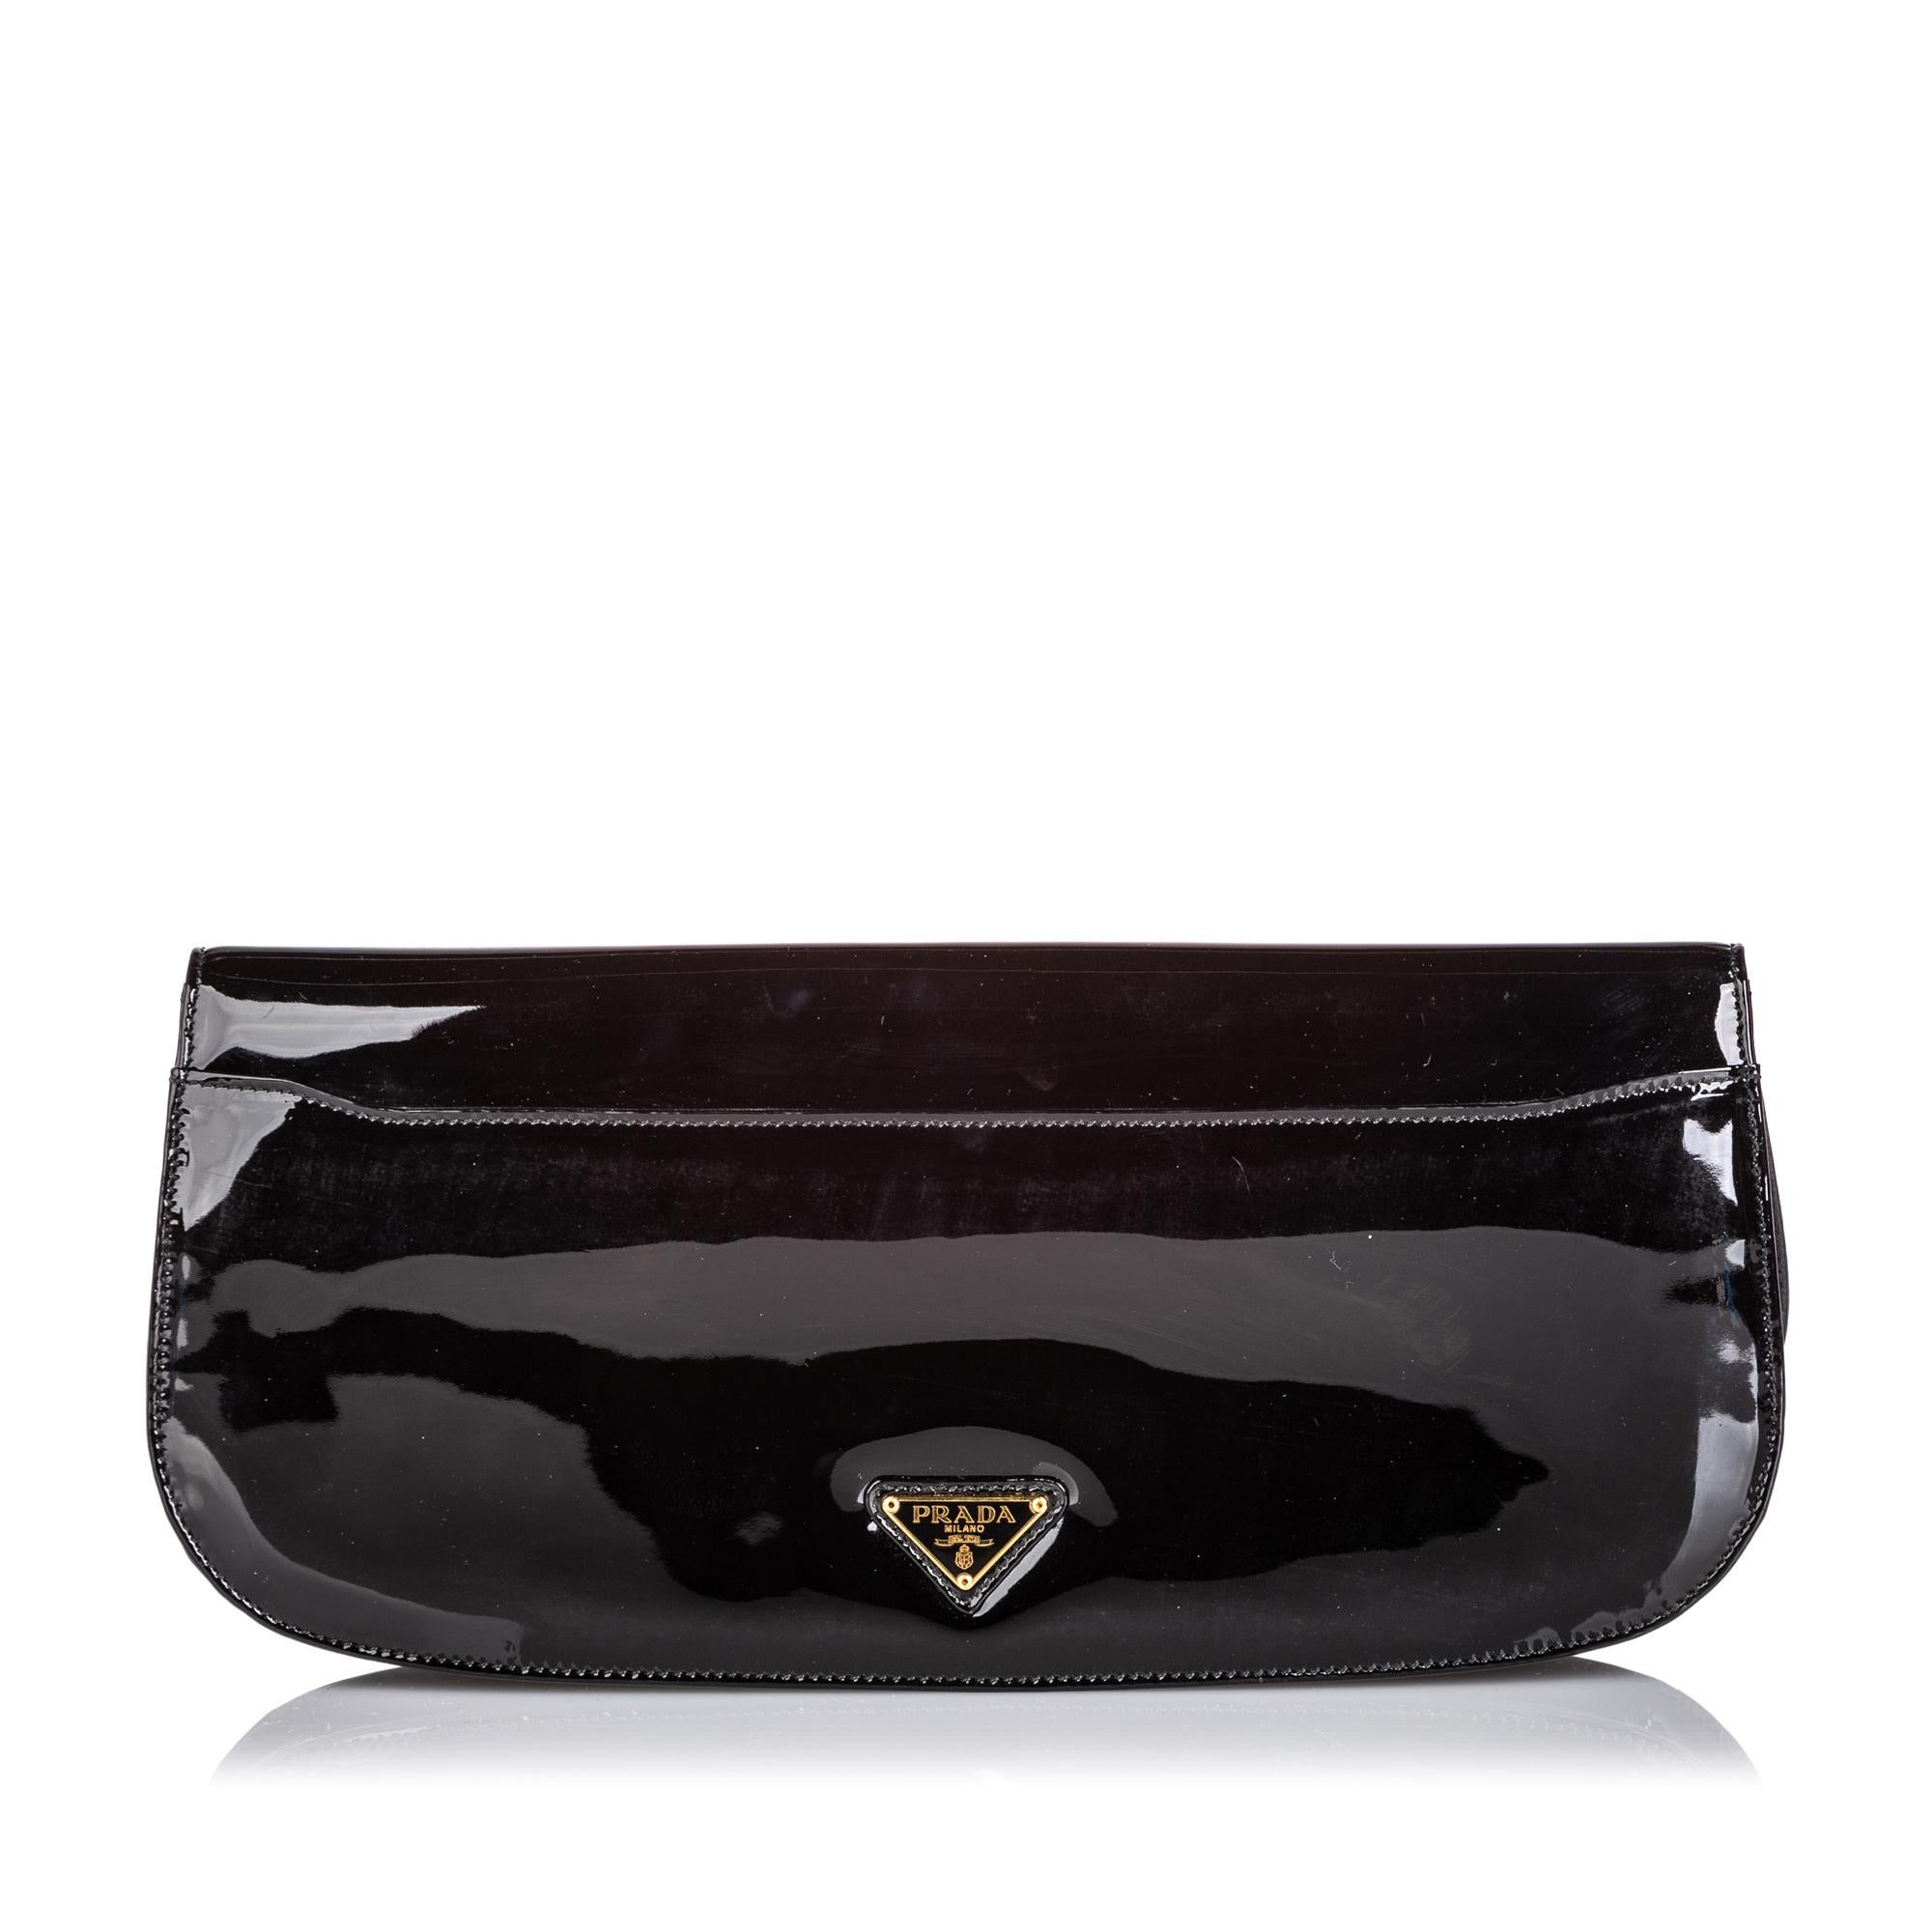 Vintage Authentic Prada Black Patent Leather Clutch Bag ITALY w SMALL  In Good Condition For Sale In Orlando, FL